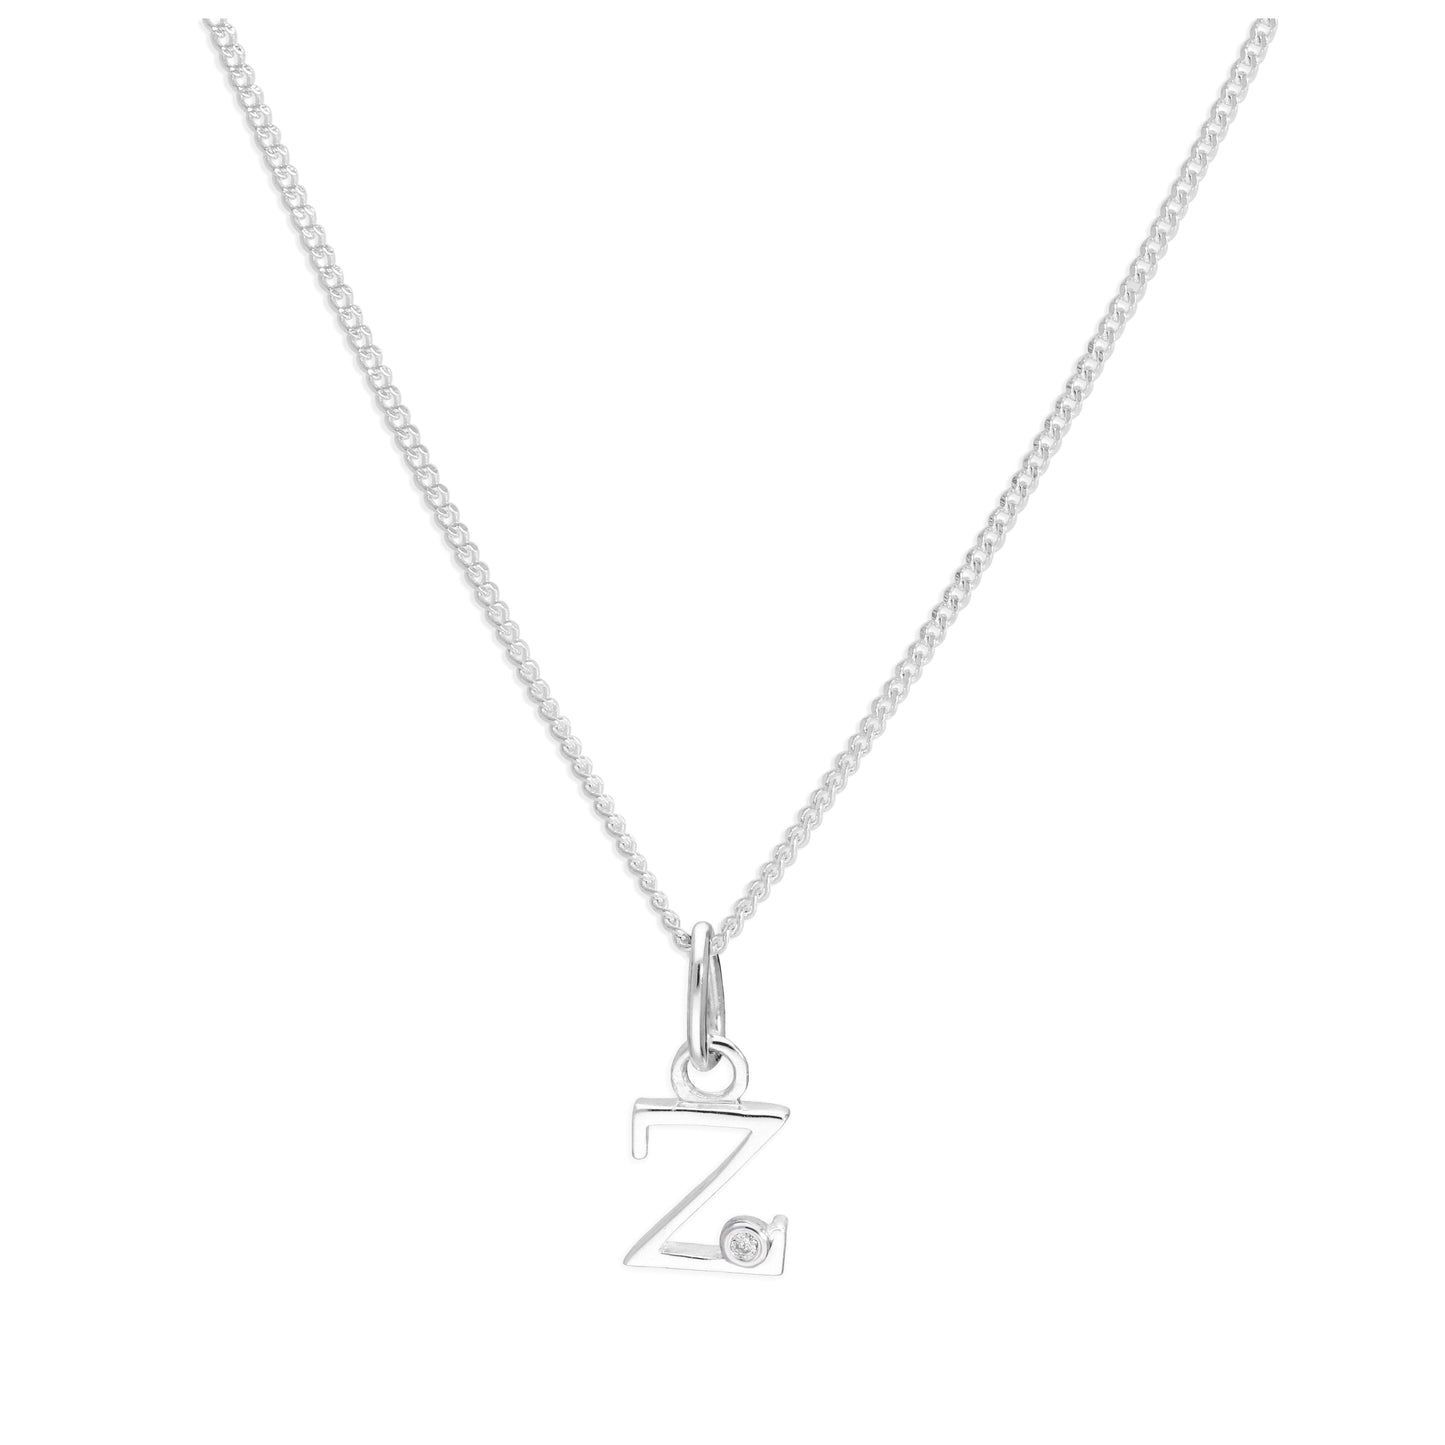 Sterling Silver Single Stone Diamond 0.4 points Letter Z Necklace Pendant 14 - 32 Inches